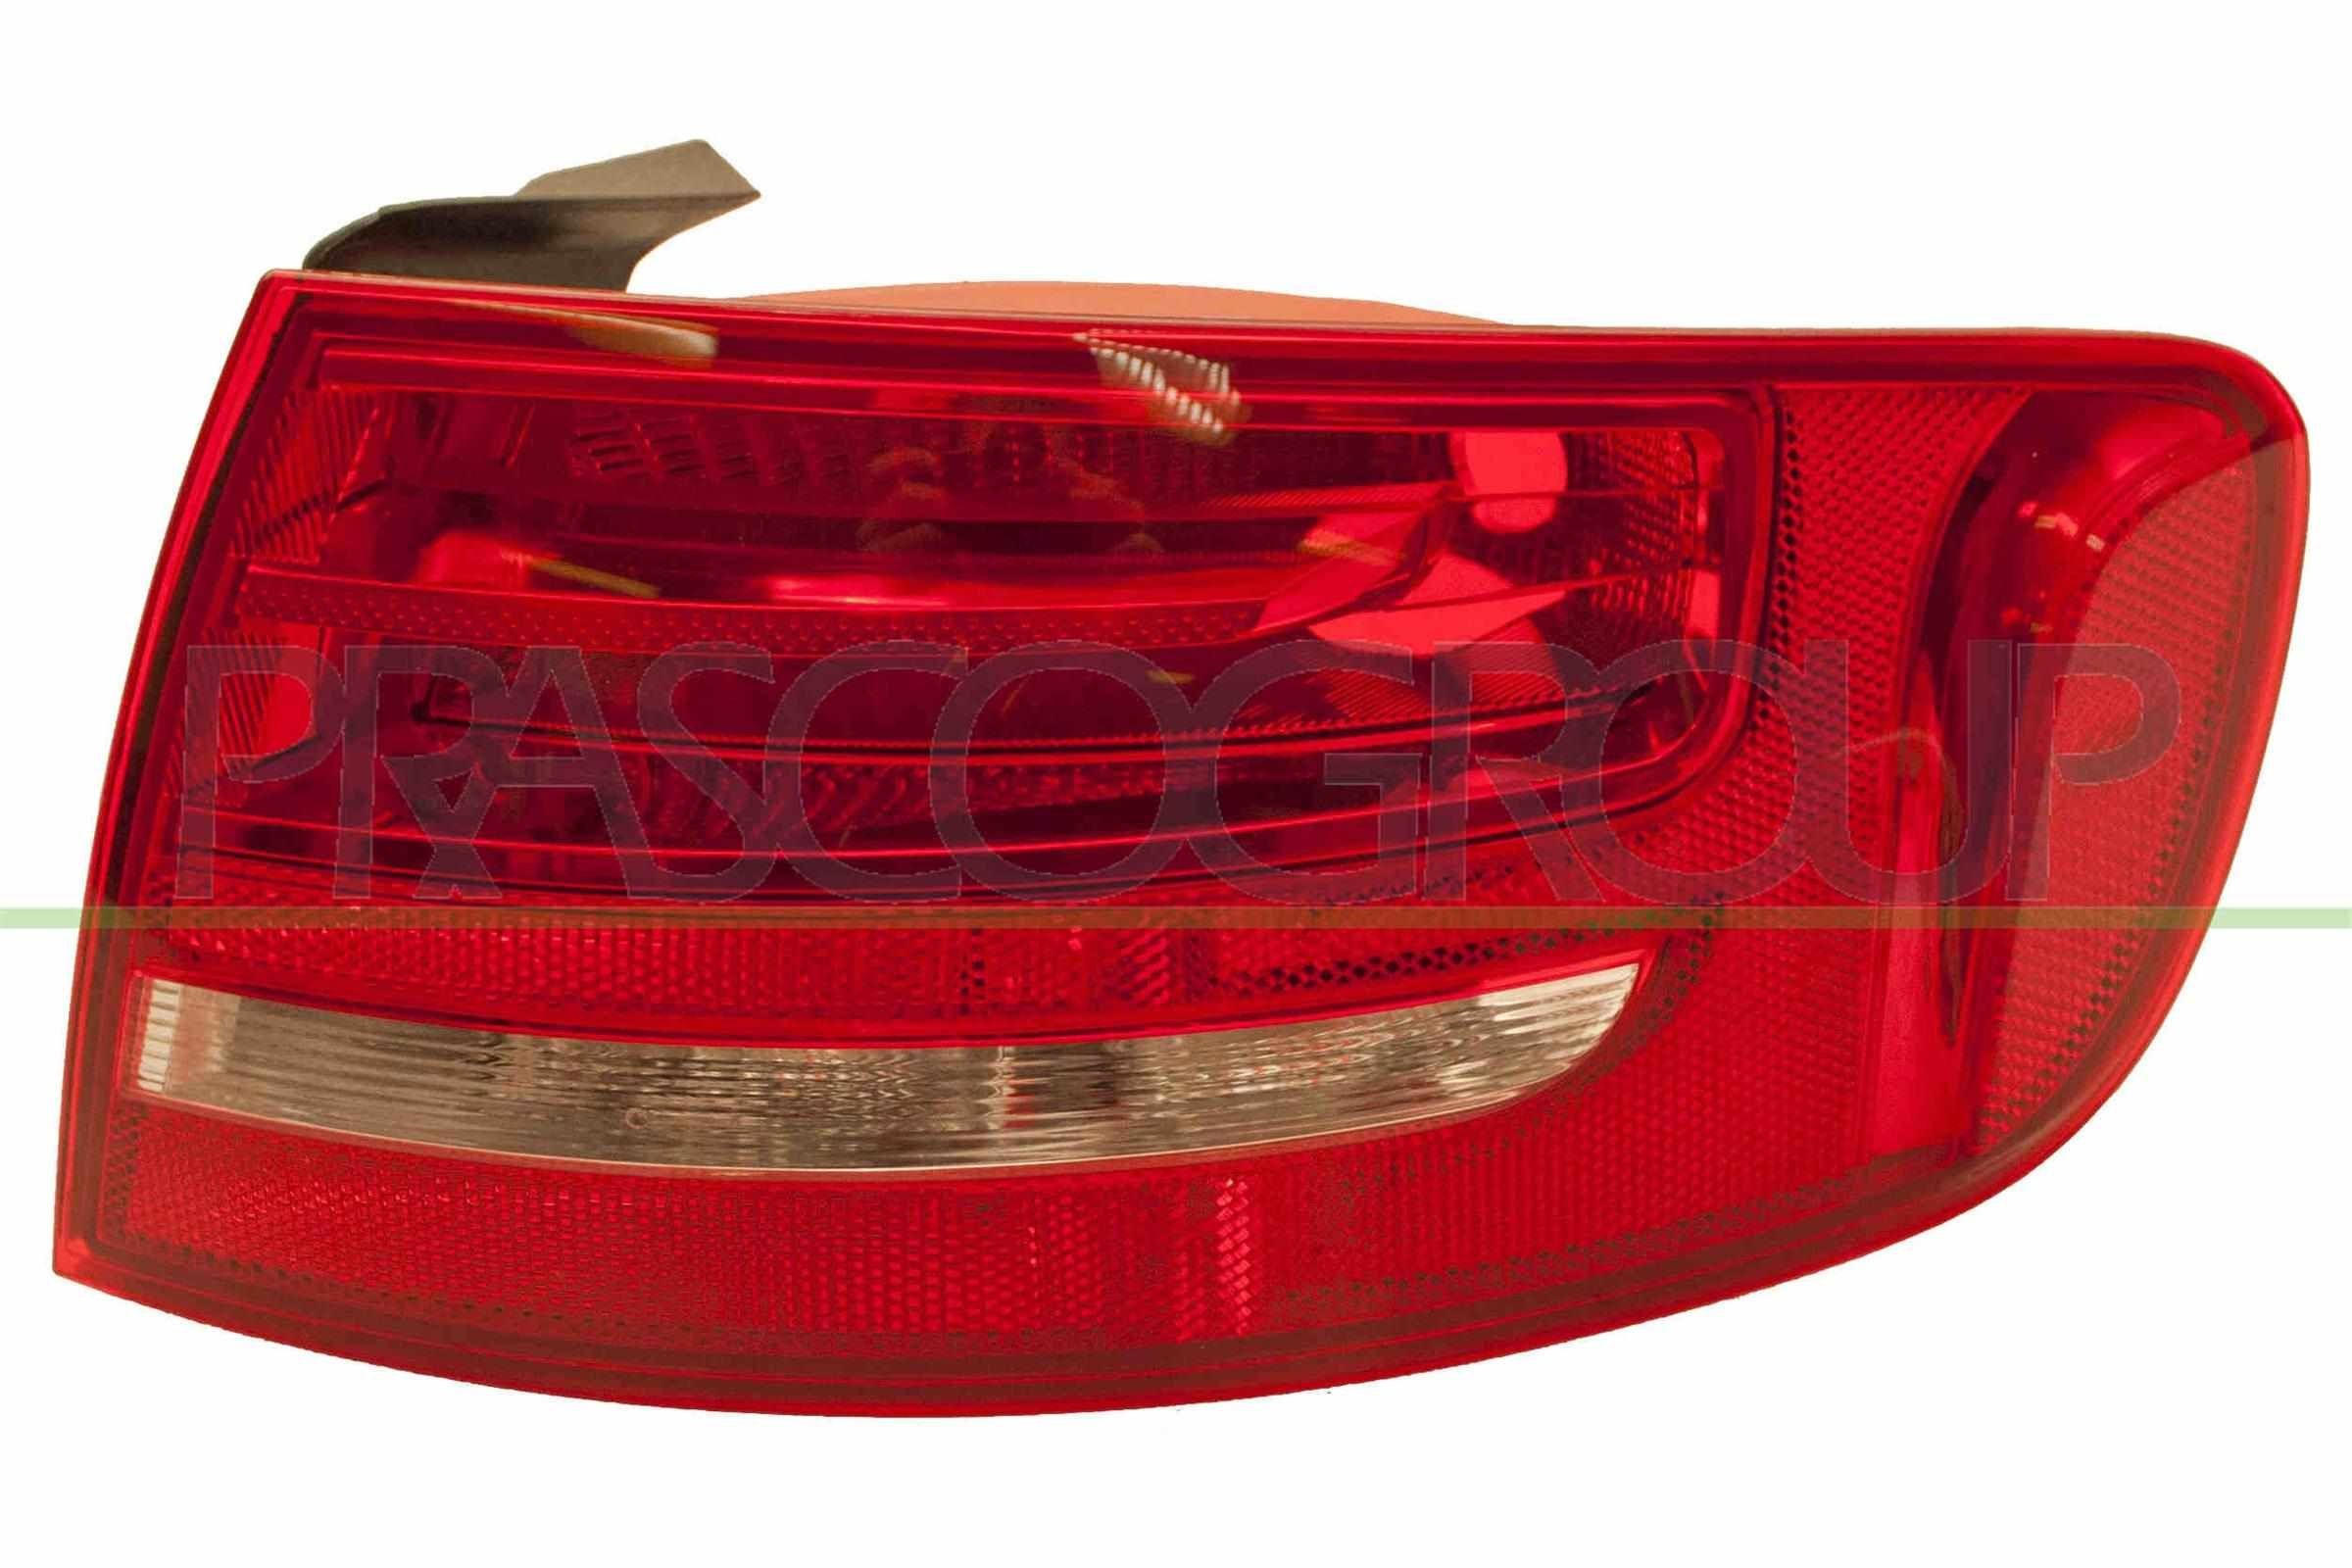 PRASCO AD0244173 Rear light DODGE experience and price